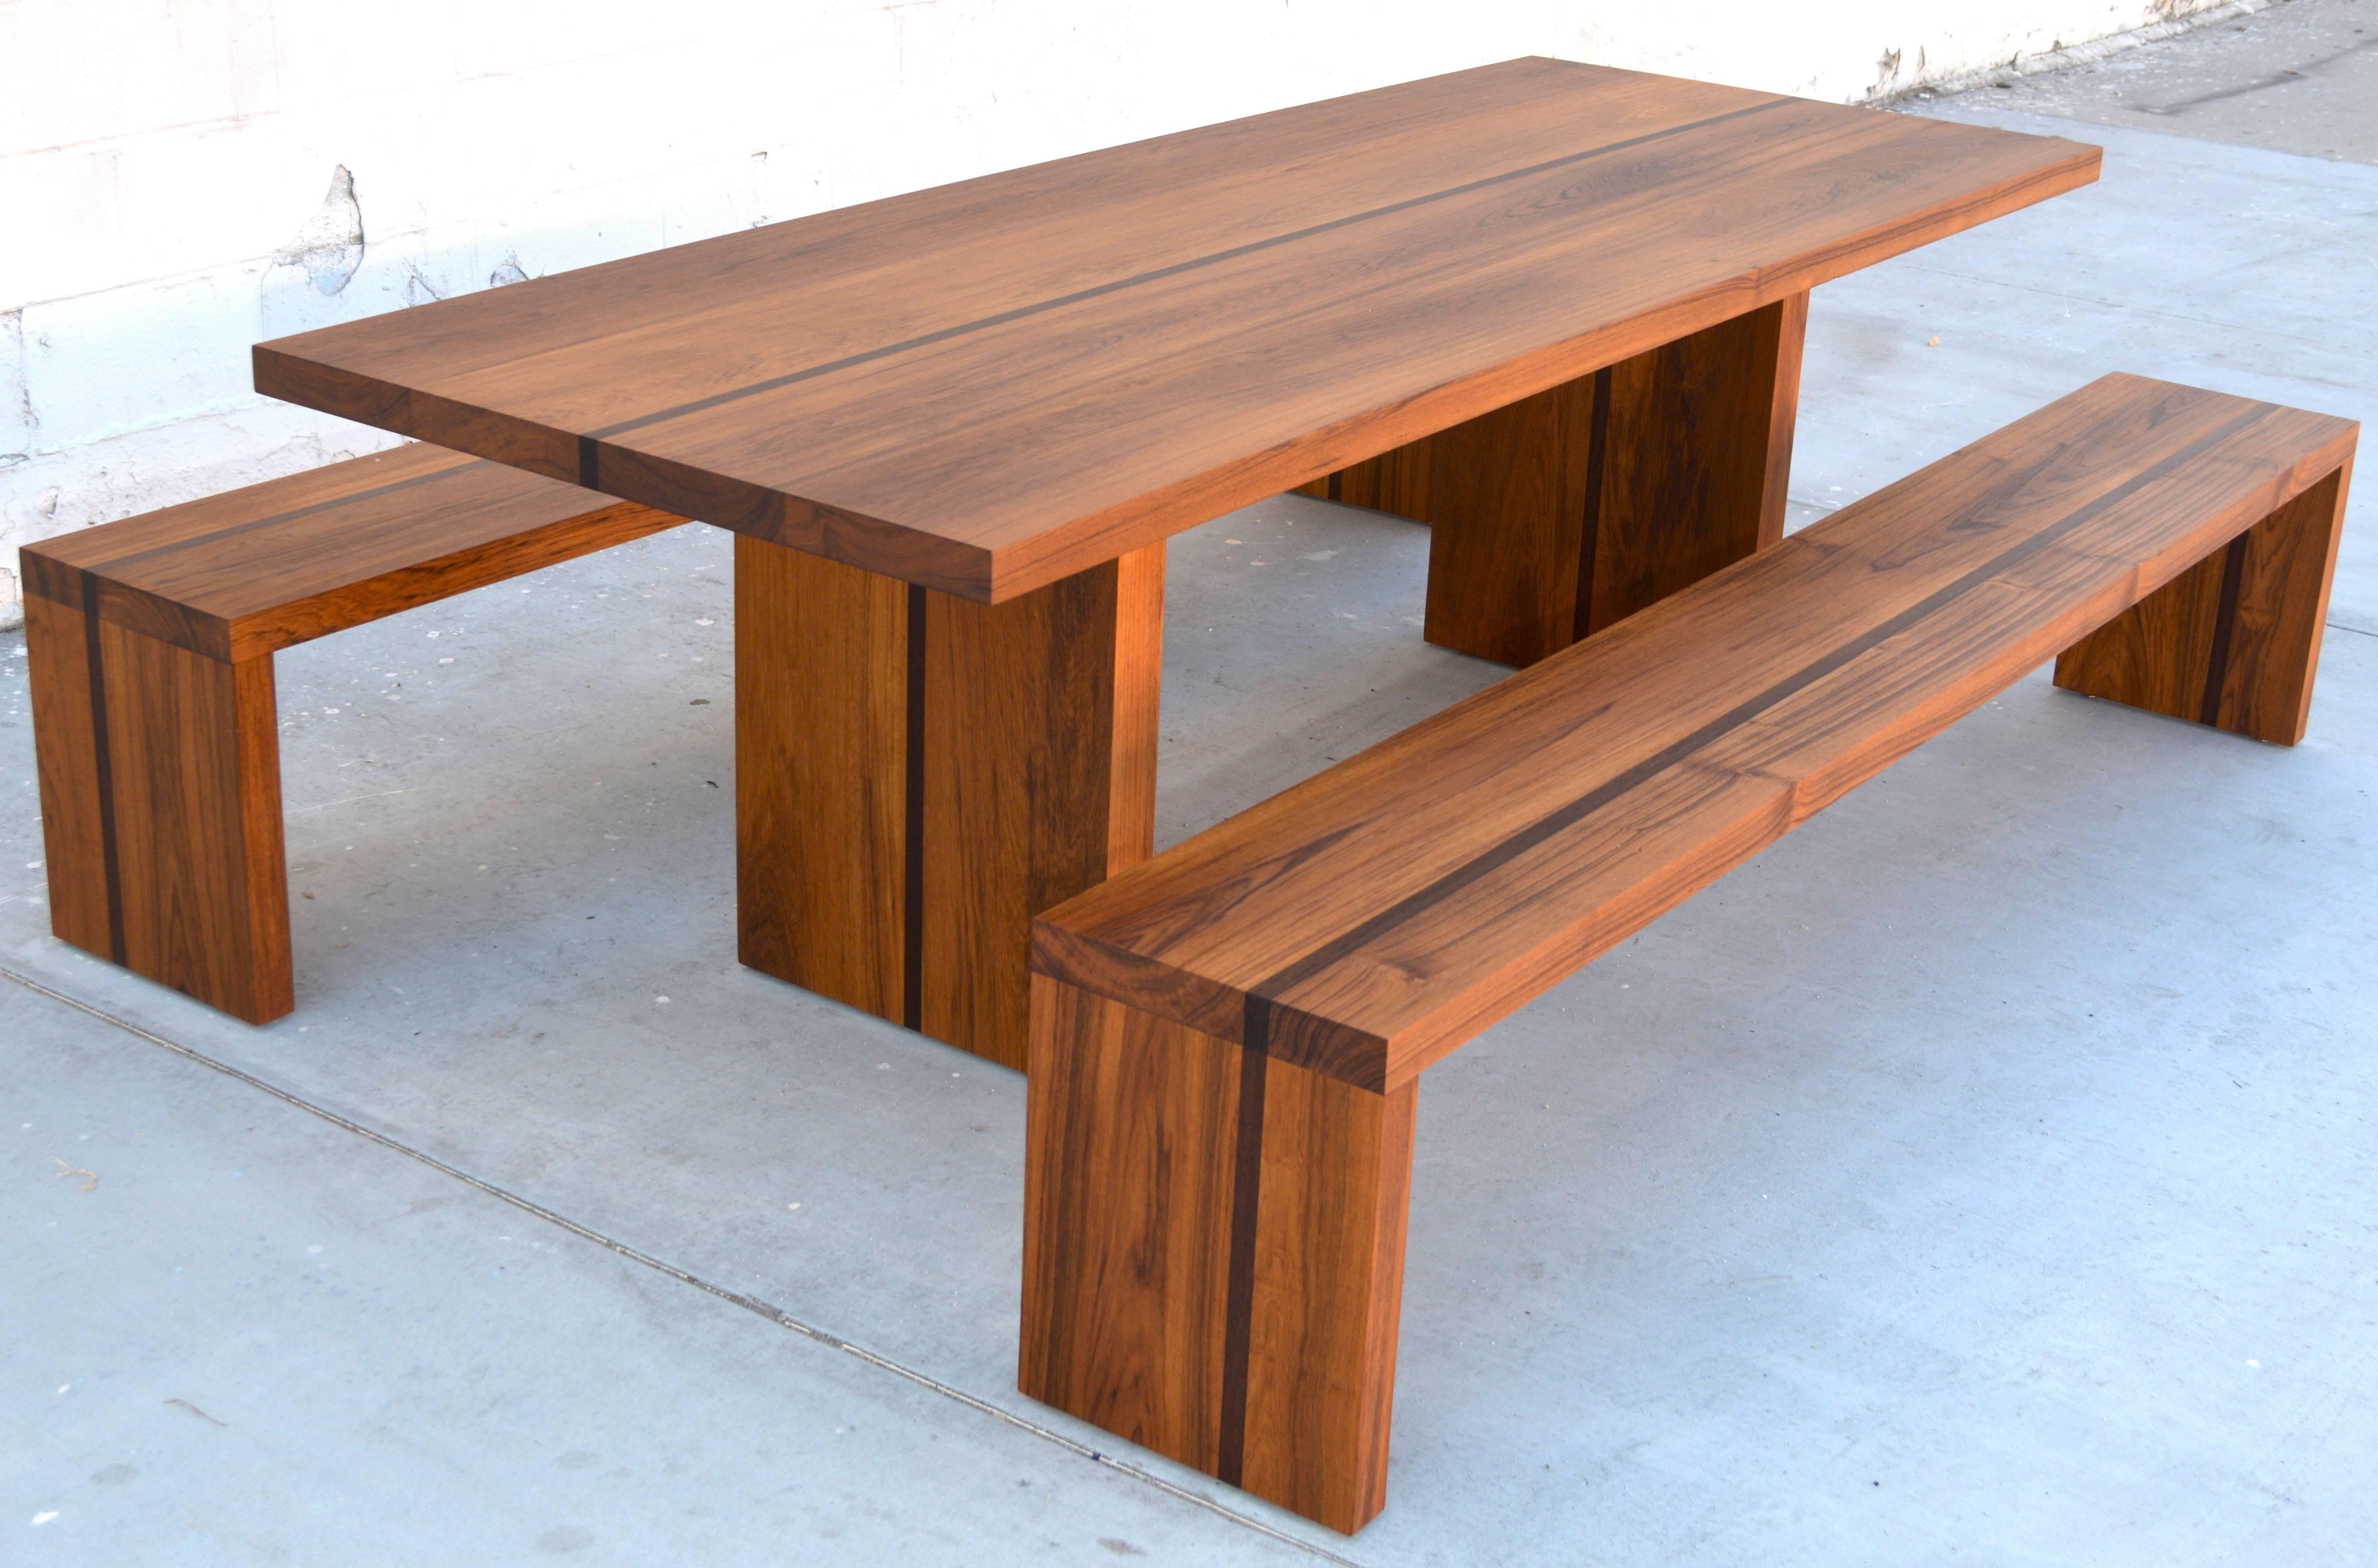 Designed to withstand any climate, this teak dining table can be used either indoors or outdoors. Seen here with a 96